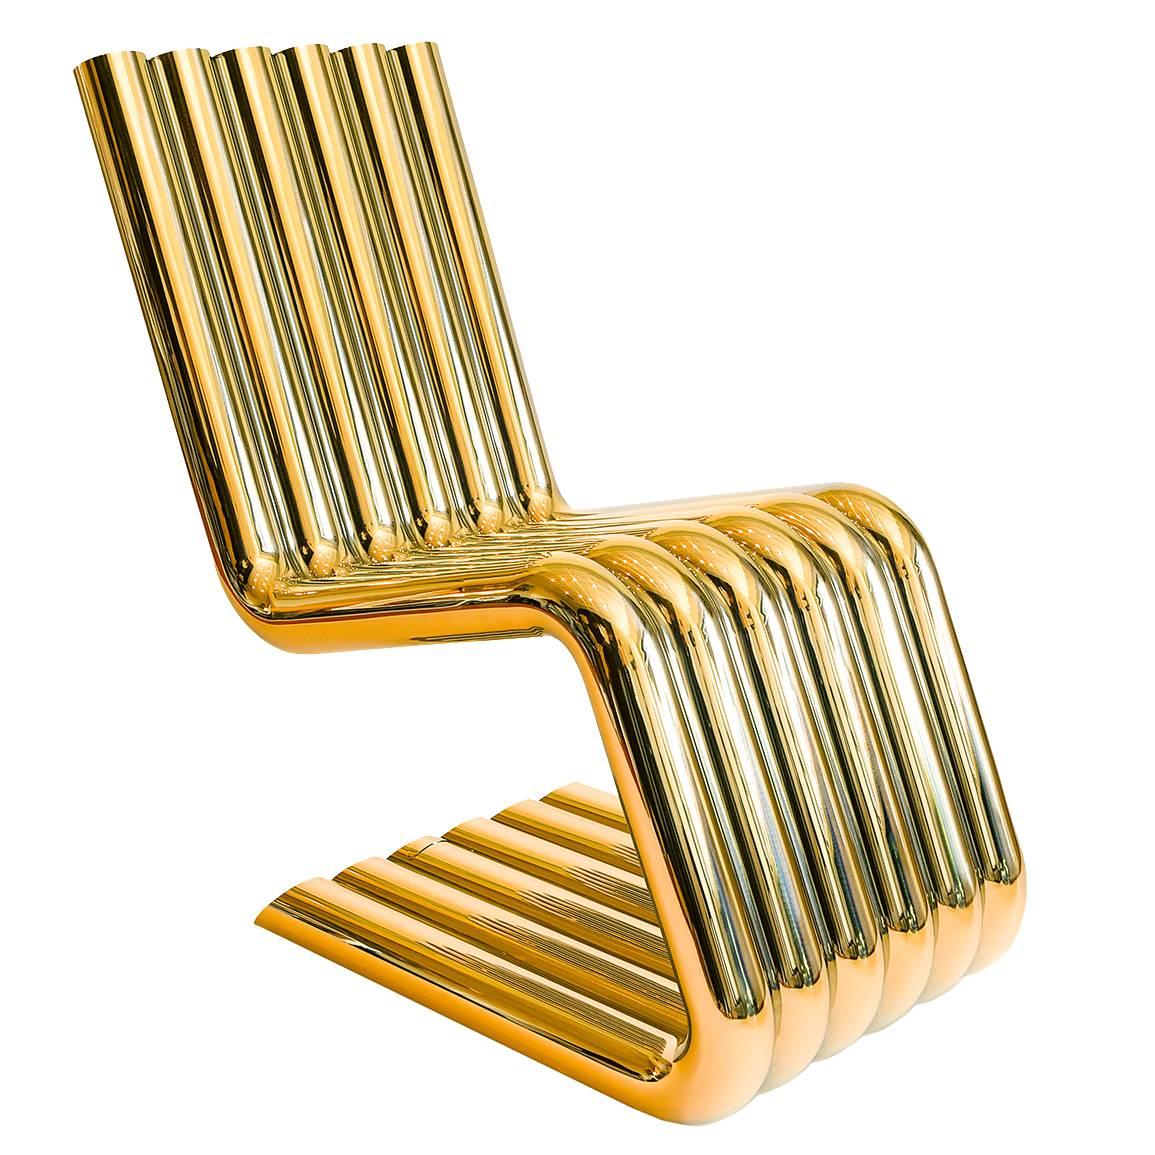 Xosted Lounge Chair One of a Kind 24-karat Gold-Plated over Stainless Steel For Sale